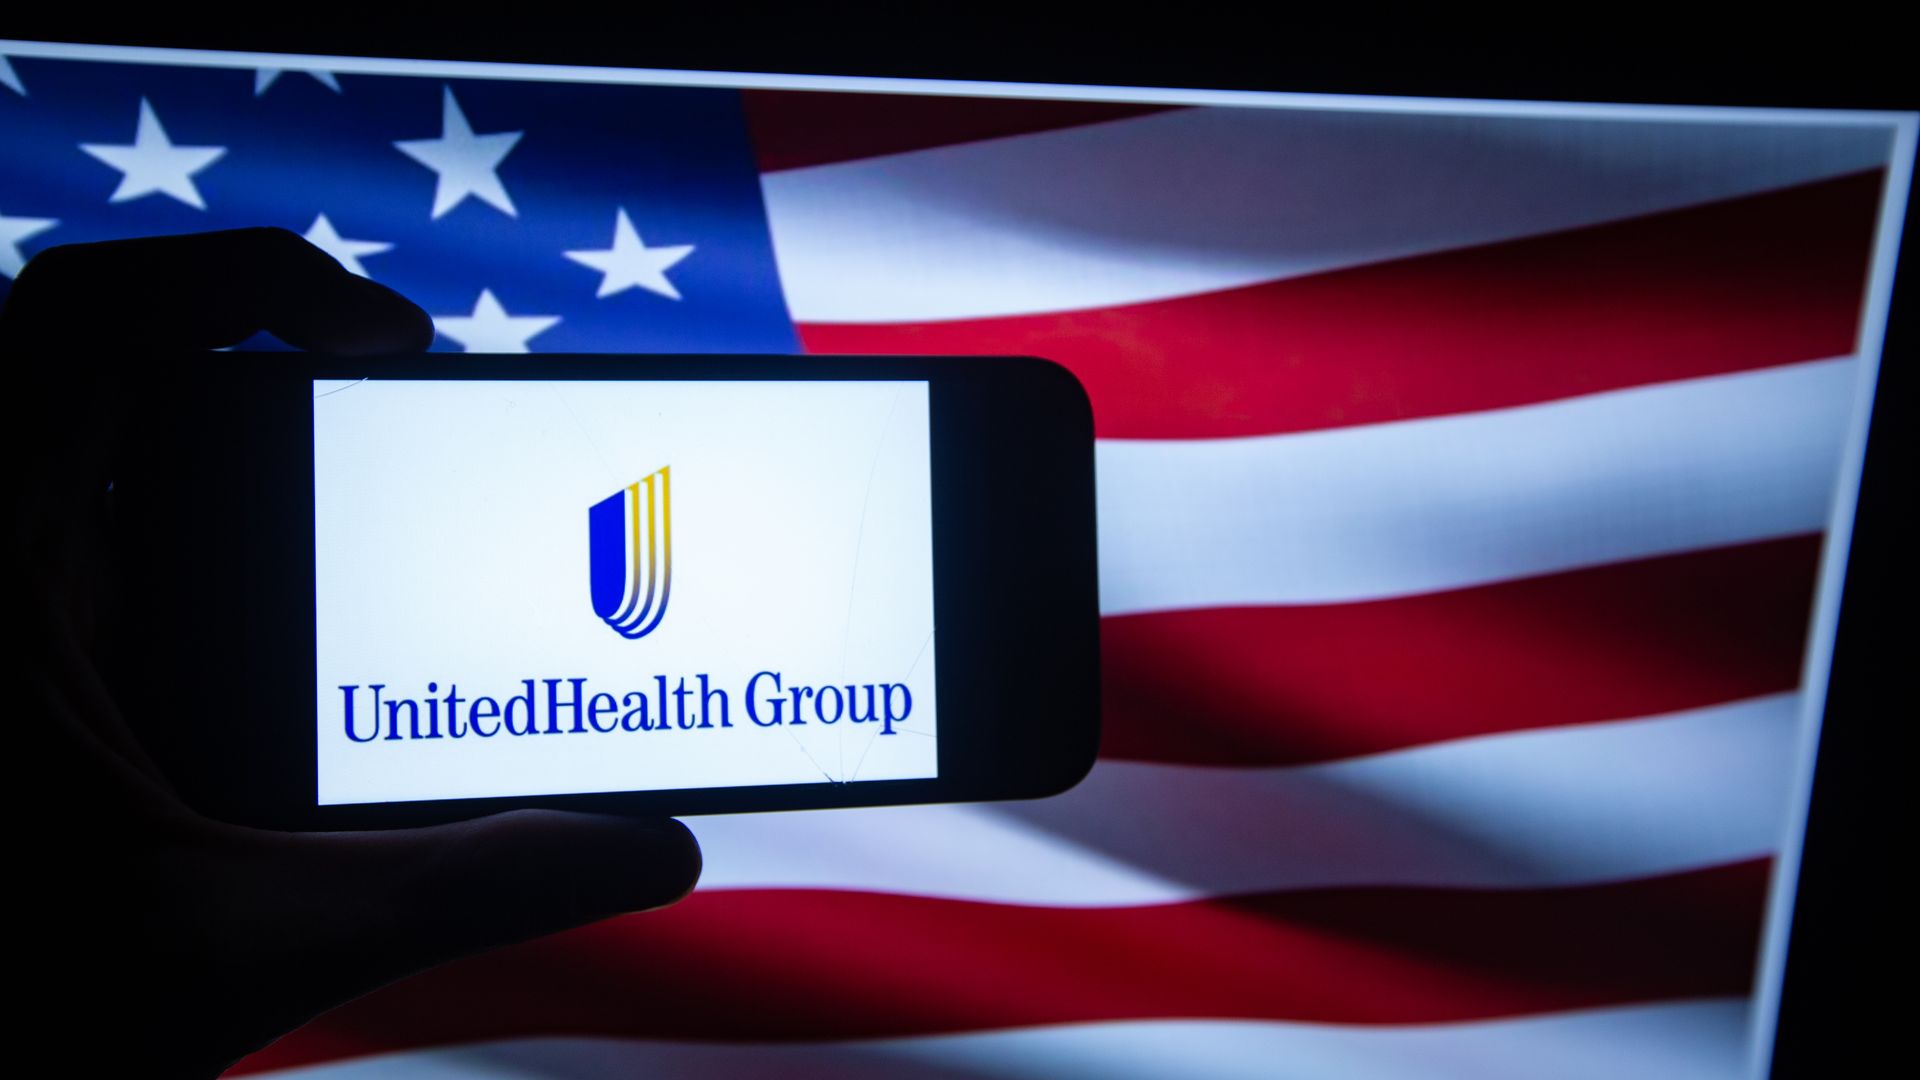 MAn holding phone that has united health group logo on it